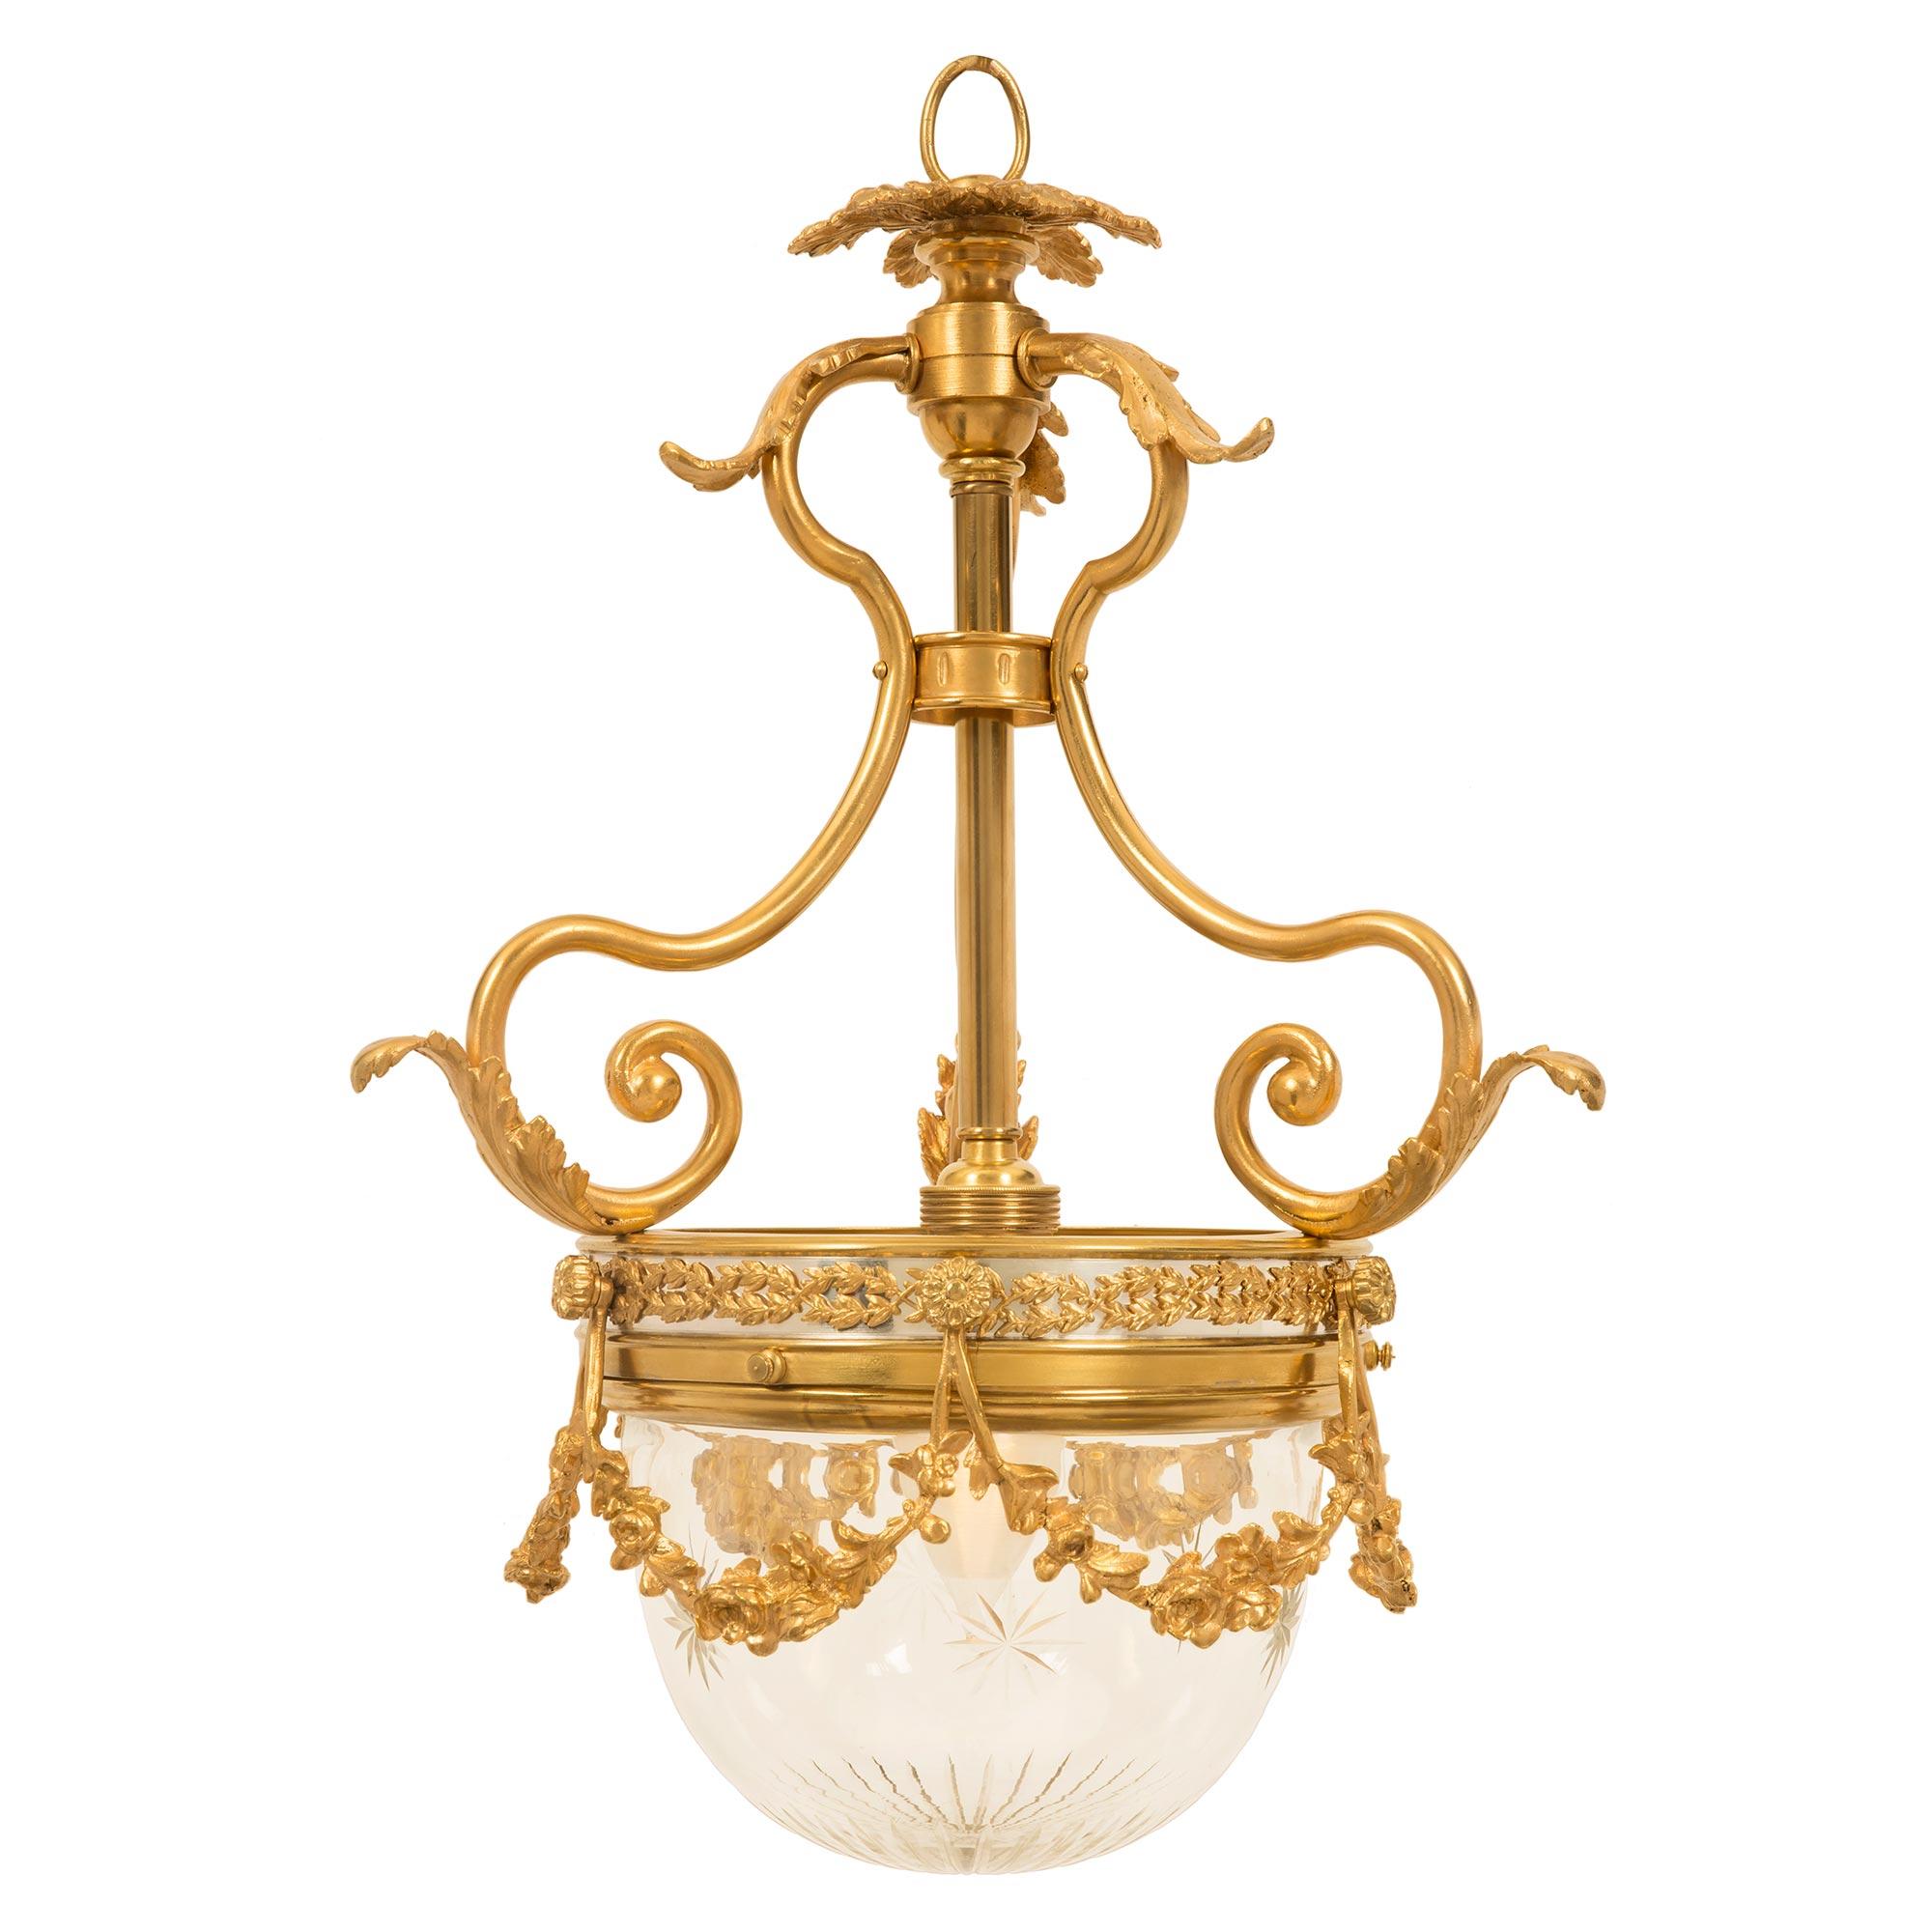 An outstanding French 19th century Louis XVI st. Belle Époque period ormolu and crystal chandelier. The chandelier is centered by a magnificent cut crystal bottom dome with lovely and most decorative cut stars. The central rim displays a fine wrap